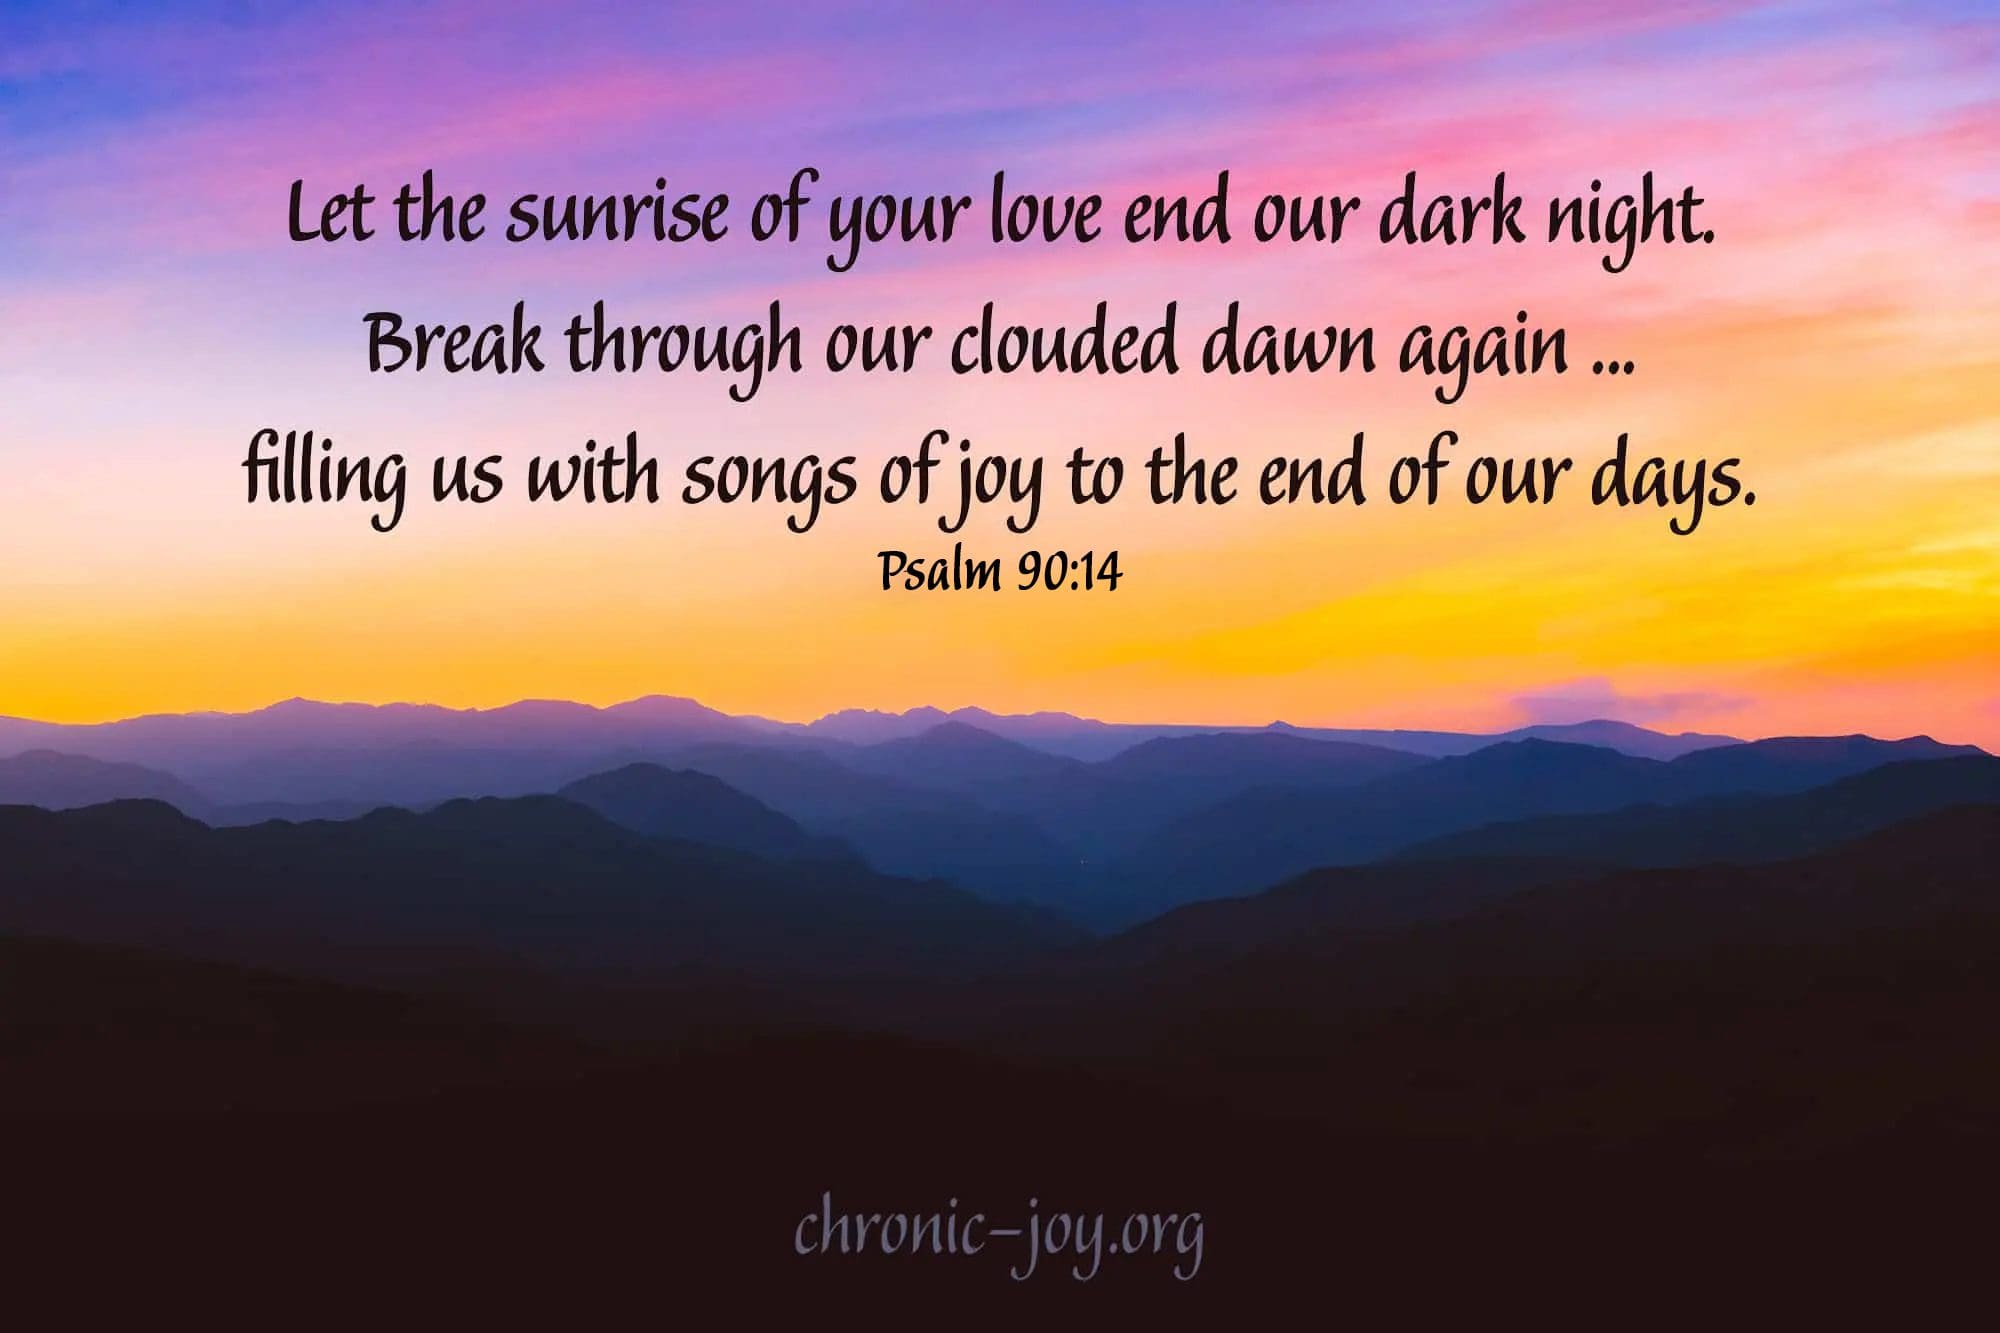 “Let the sunrise of your love end our dark night. Break through our clouded dawn again ... filling us with songs of joy to the end of our days. “Psalm 90:14 TPT